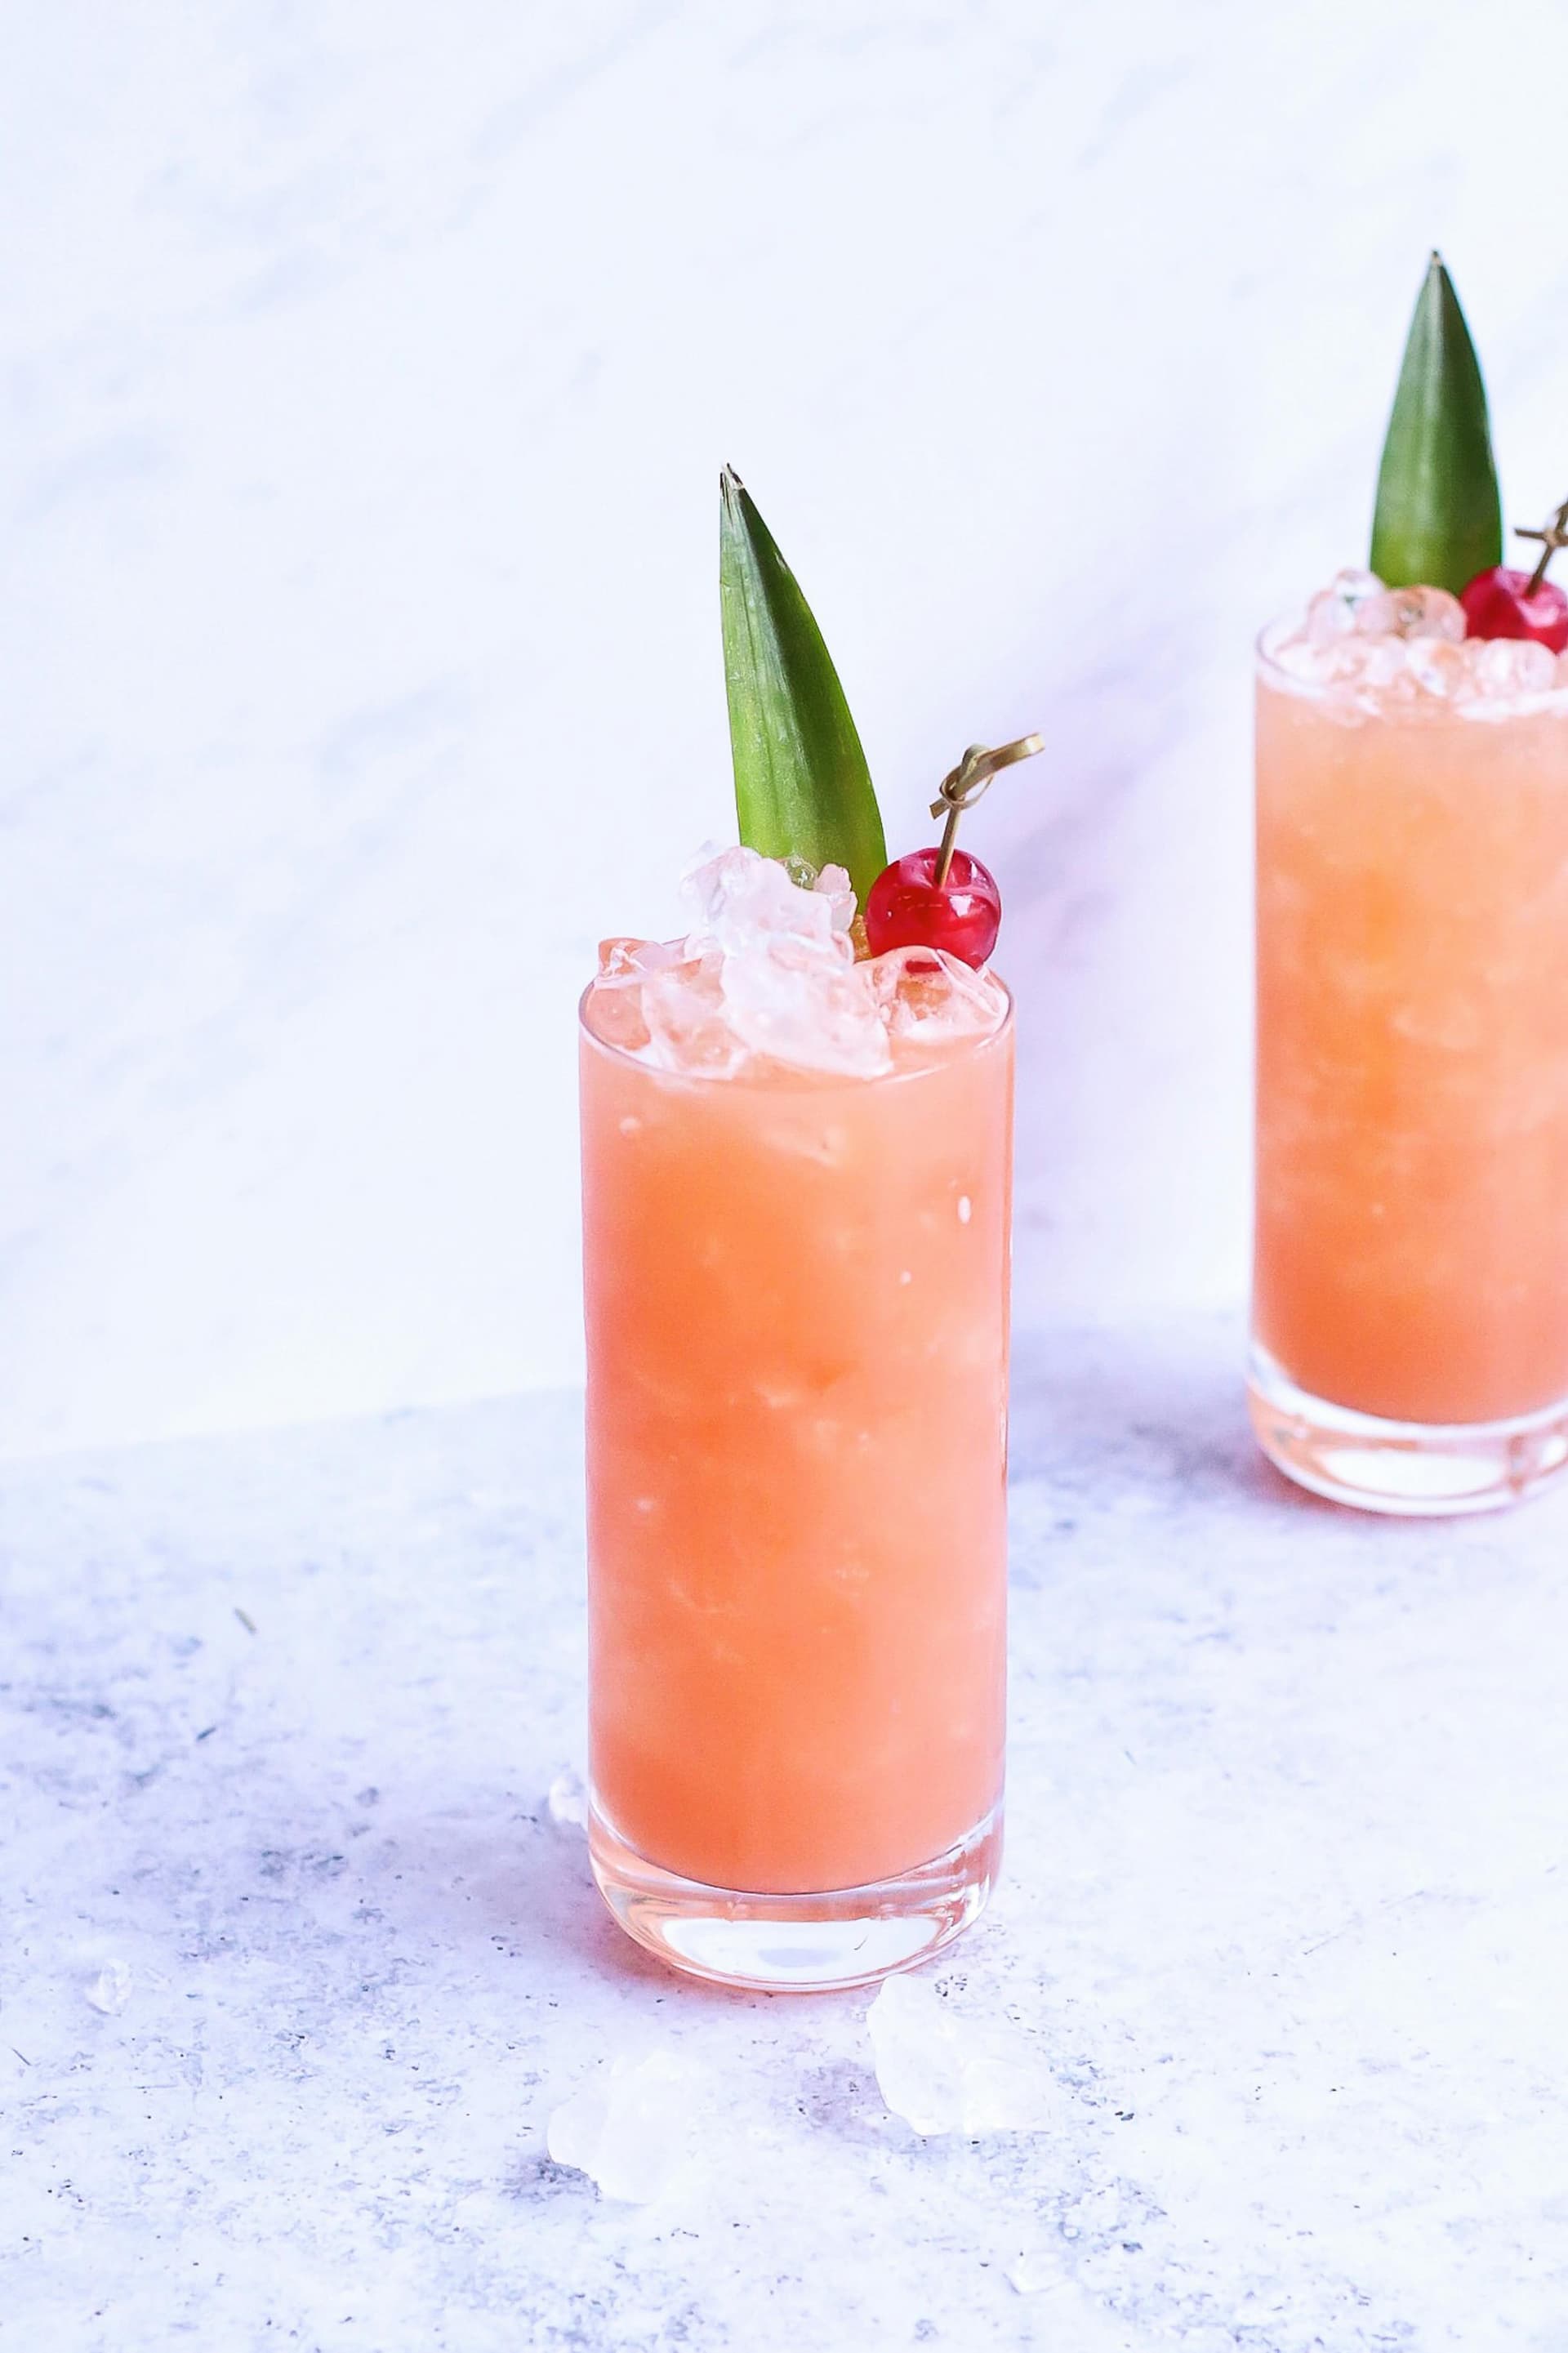 Tequila Sunrise To Sunset: Six Cocktails For An All-Day Wedding Party